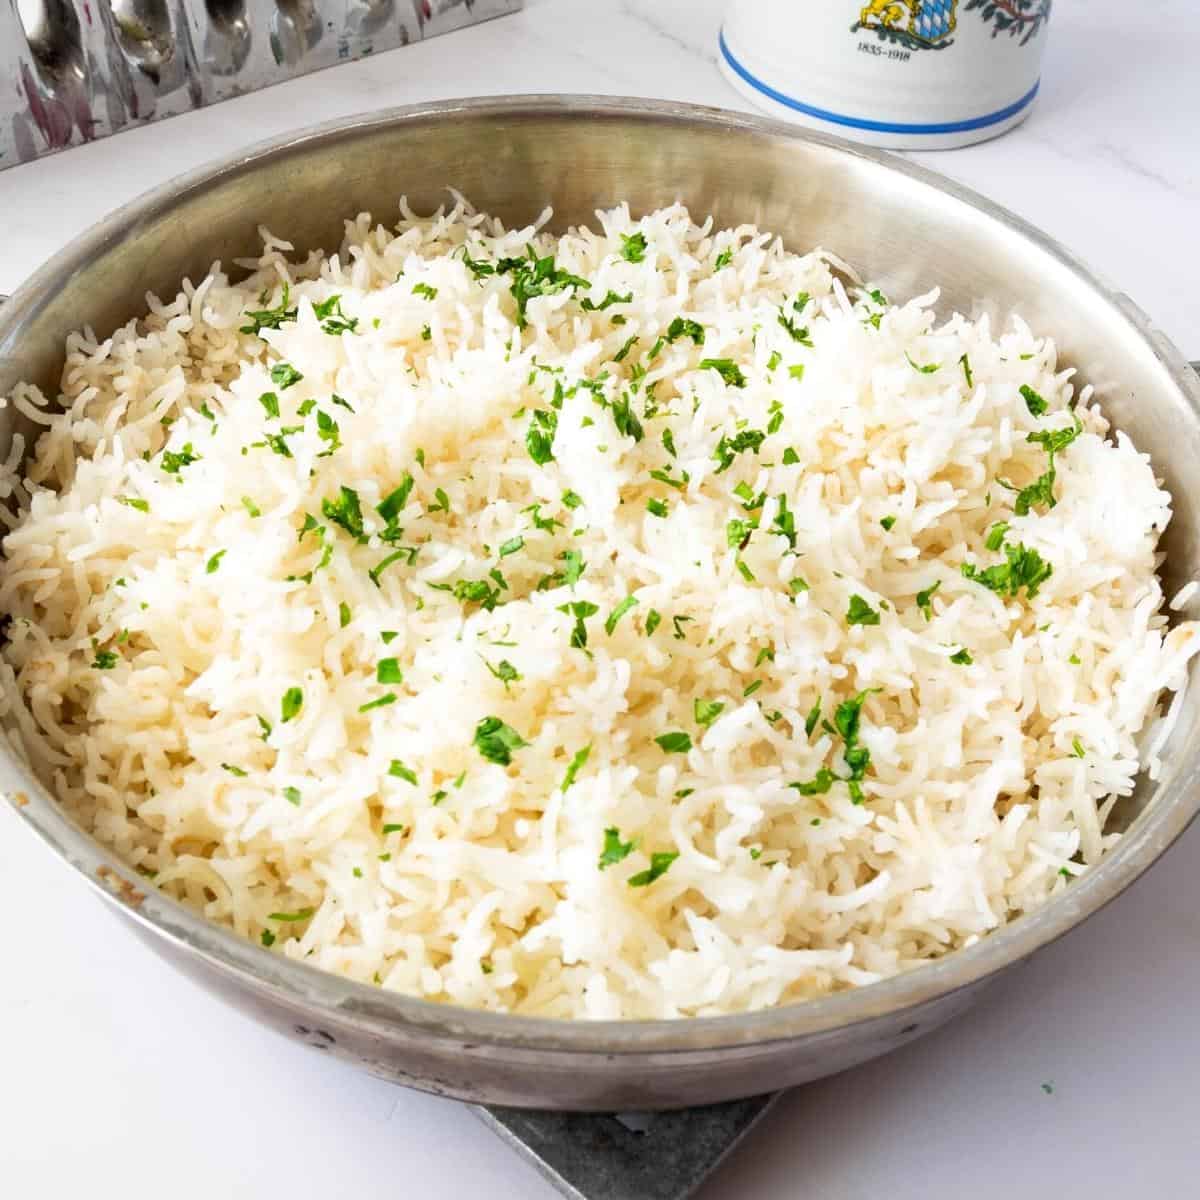 Basmati rice cooked on the stovetop.